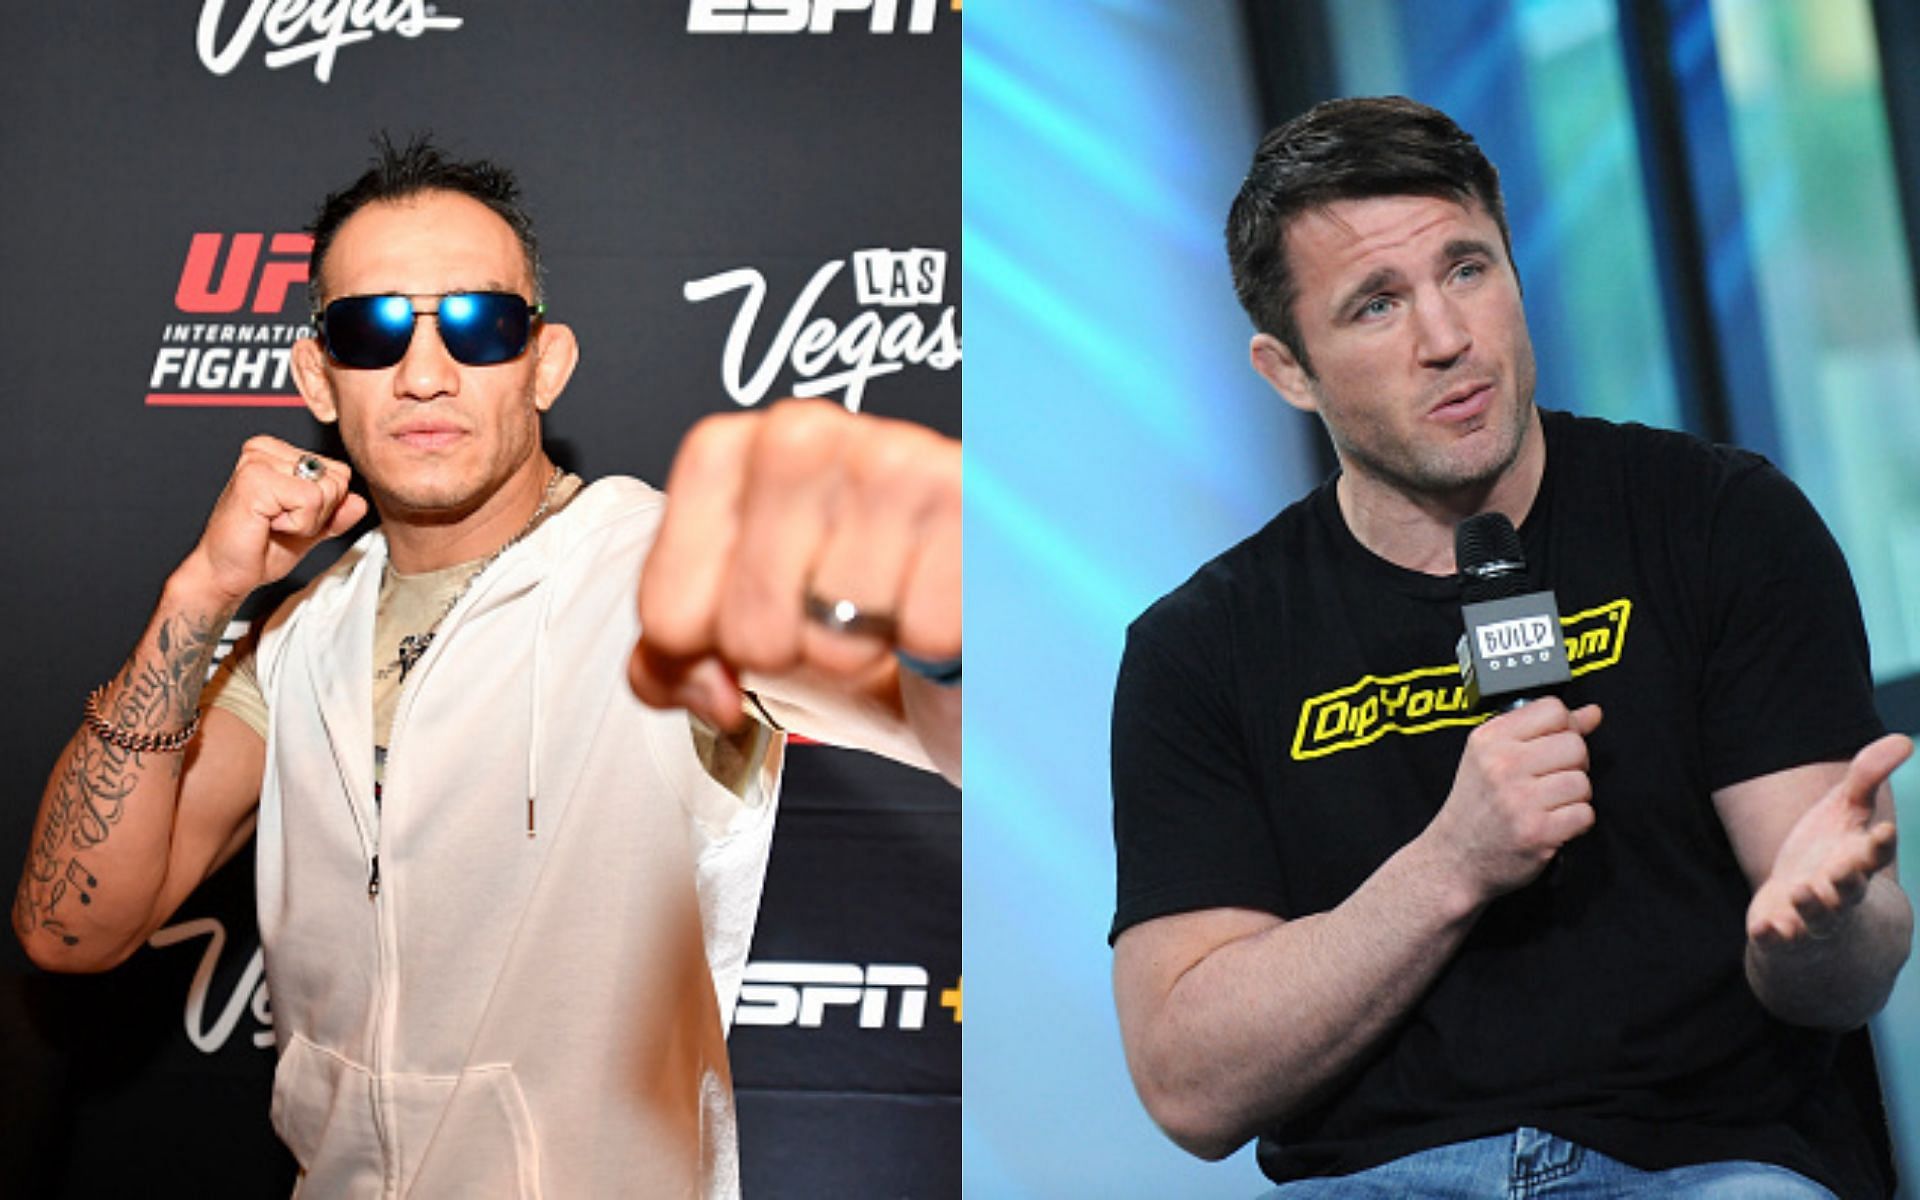 Tony Ferguson (left) and Chael Sonnen (right)(Images via Getty)